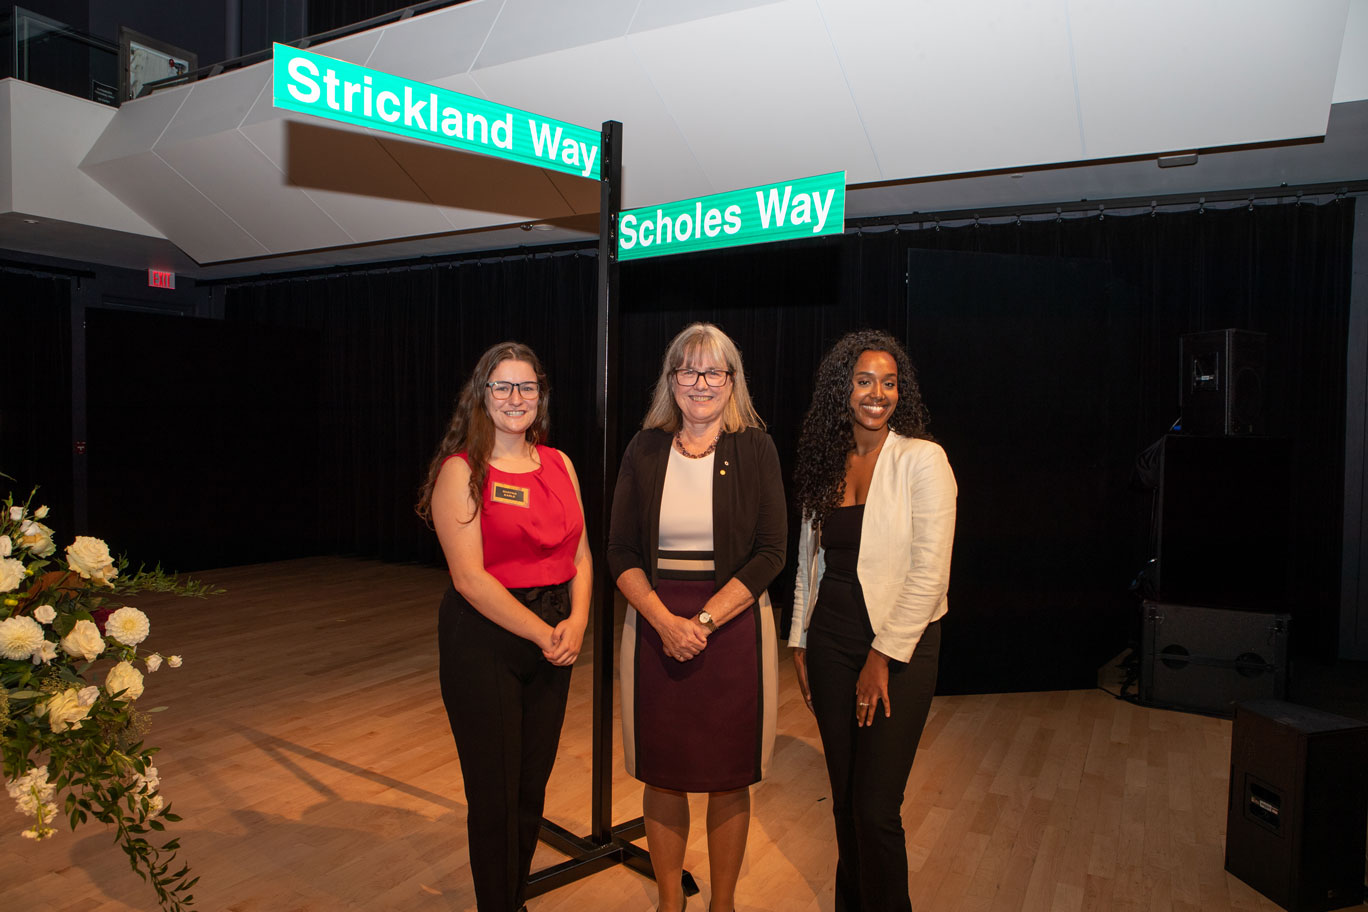 Donna Strickland stands with Shayna Earle and Mosana Abraha under the Strickland Way and Scholes Way street signs